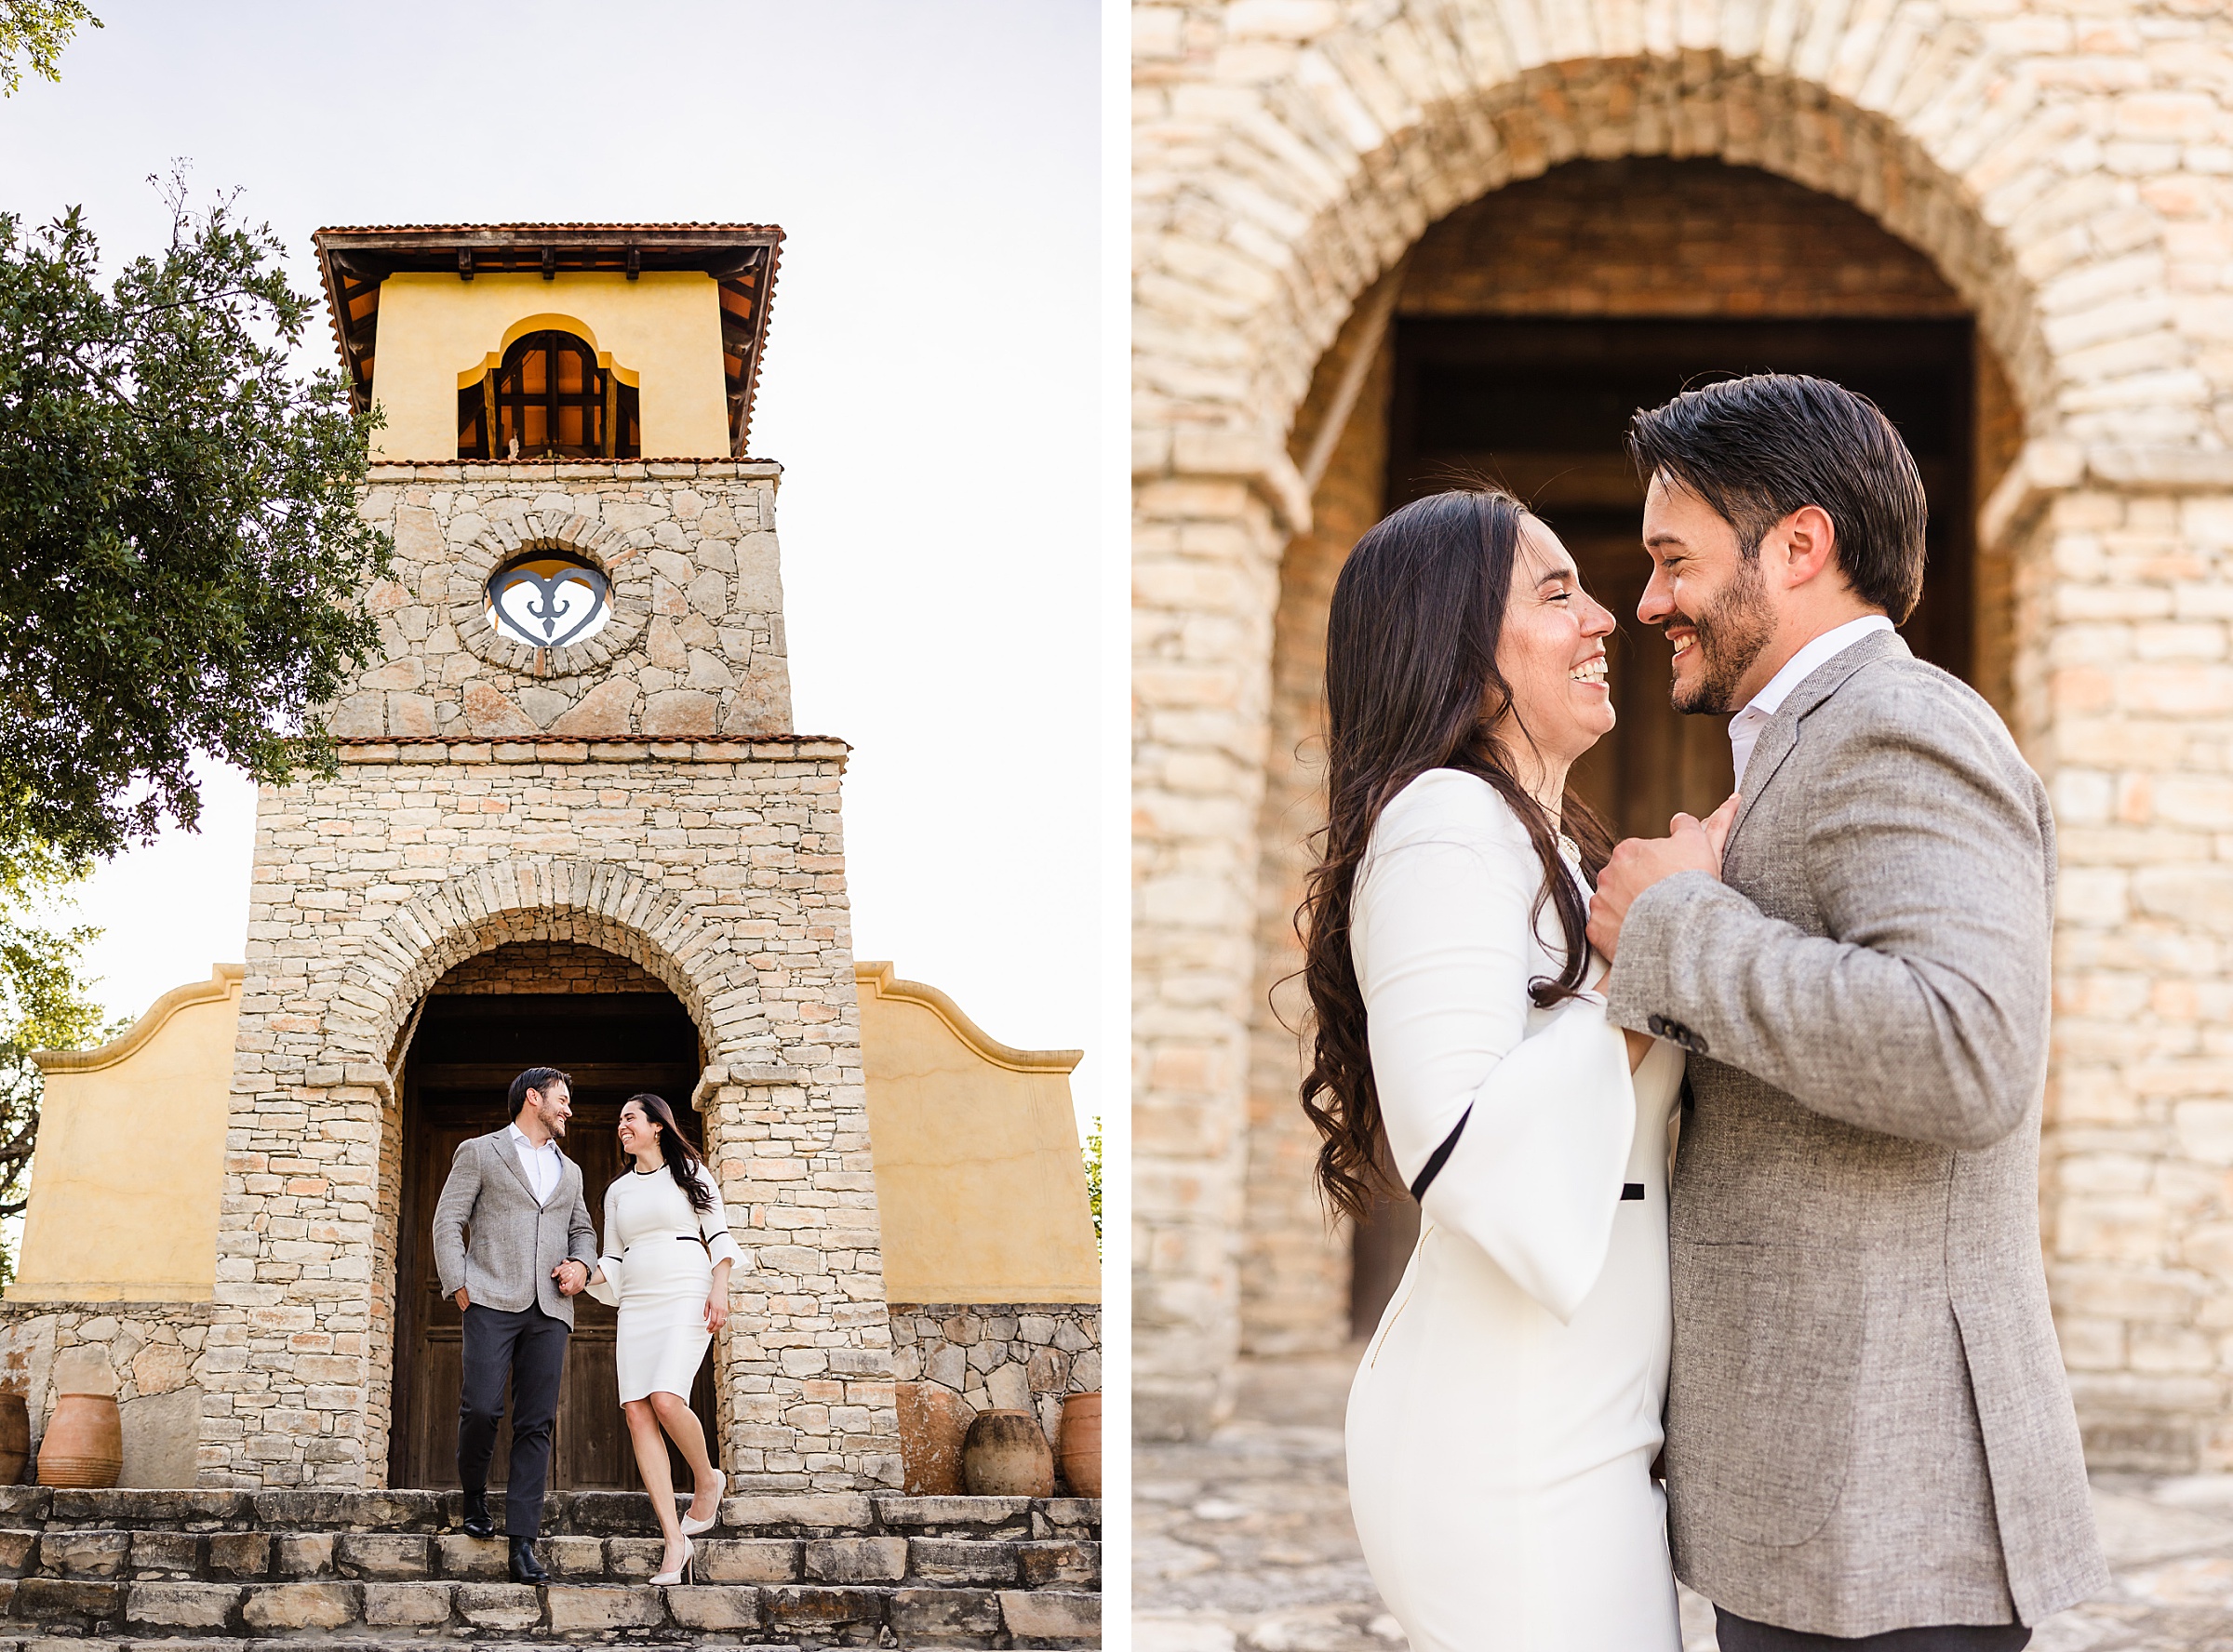 Couple celebrate their engagement at the Camp Lucy wedding venue in Dripping Springs, Texas.